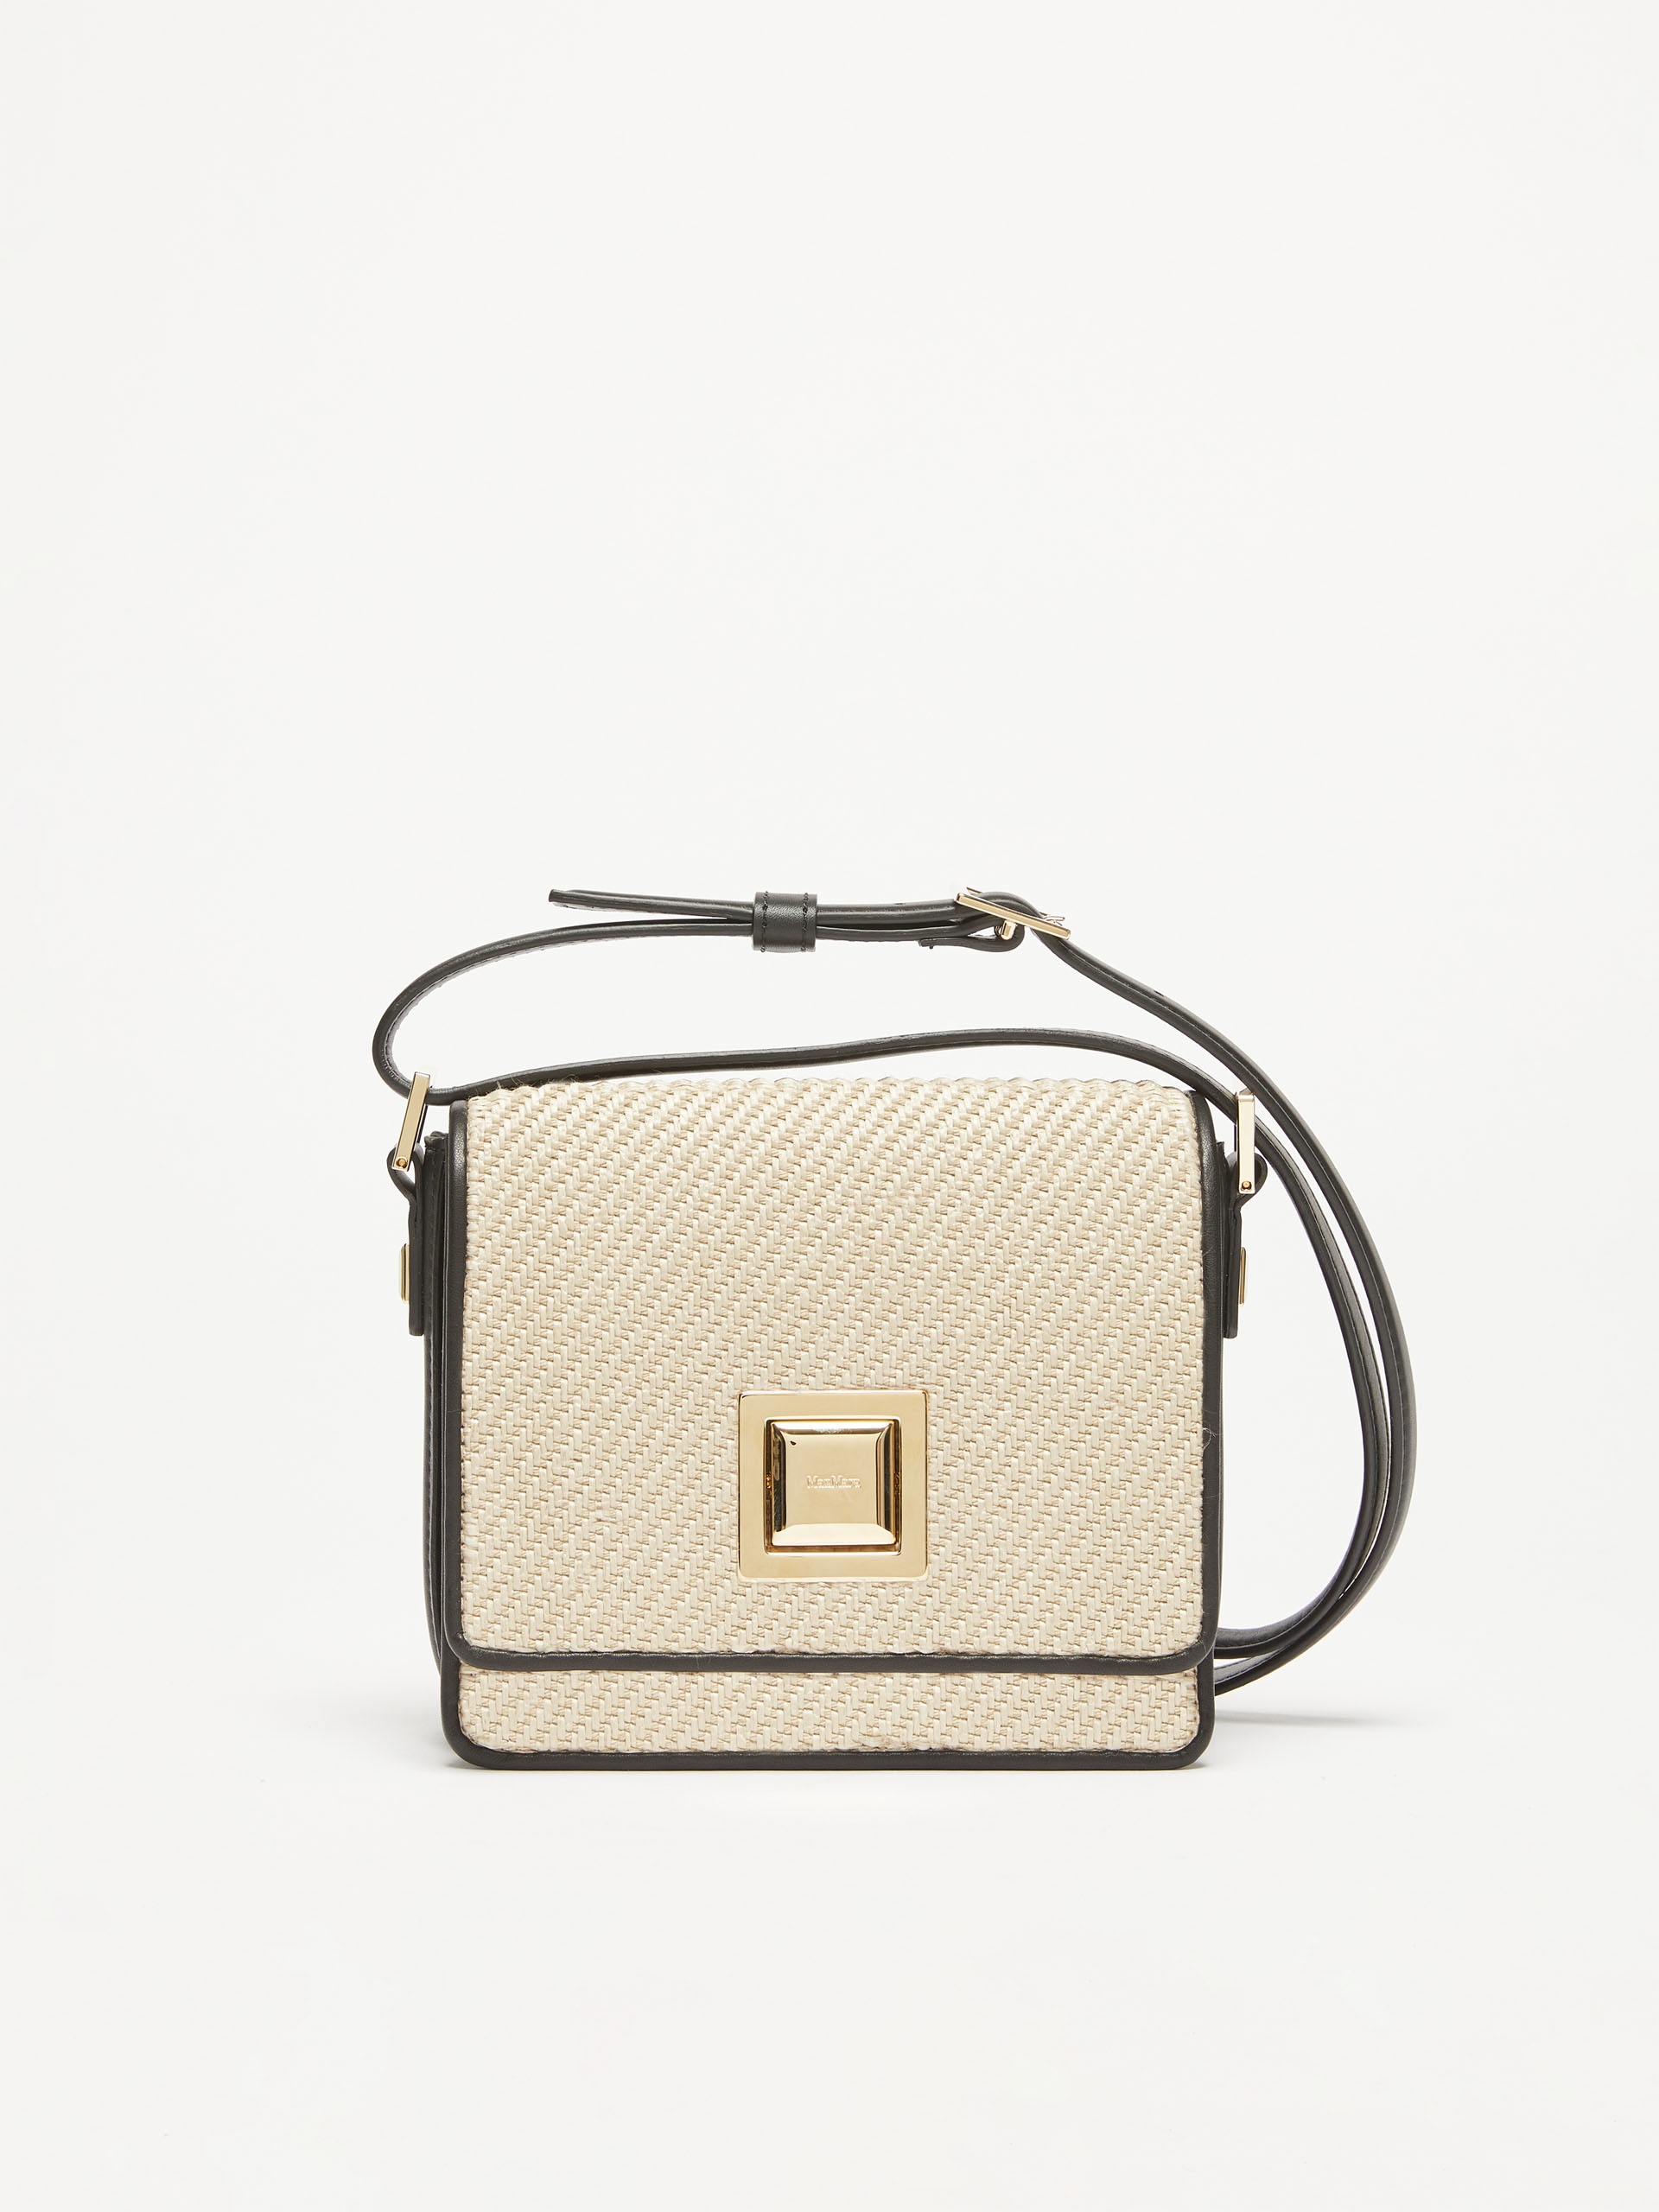 MM Bag in leather and woven fabric - 1